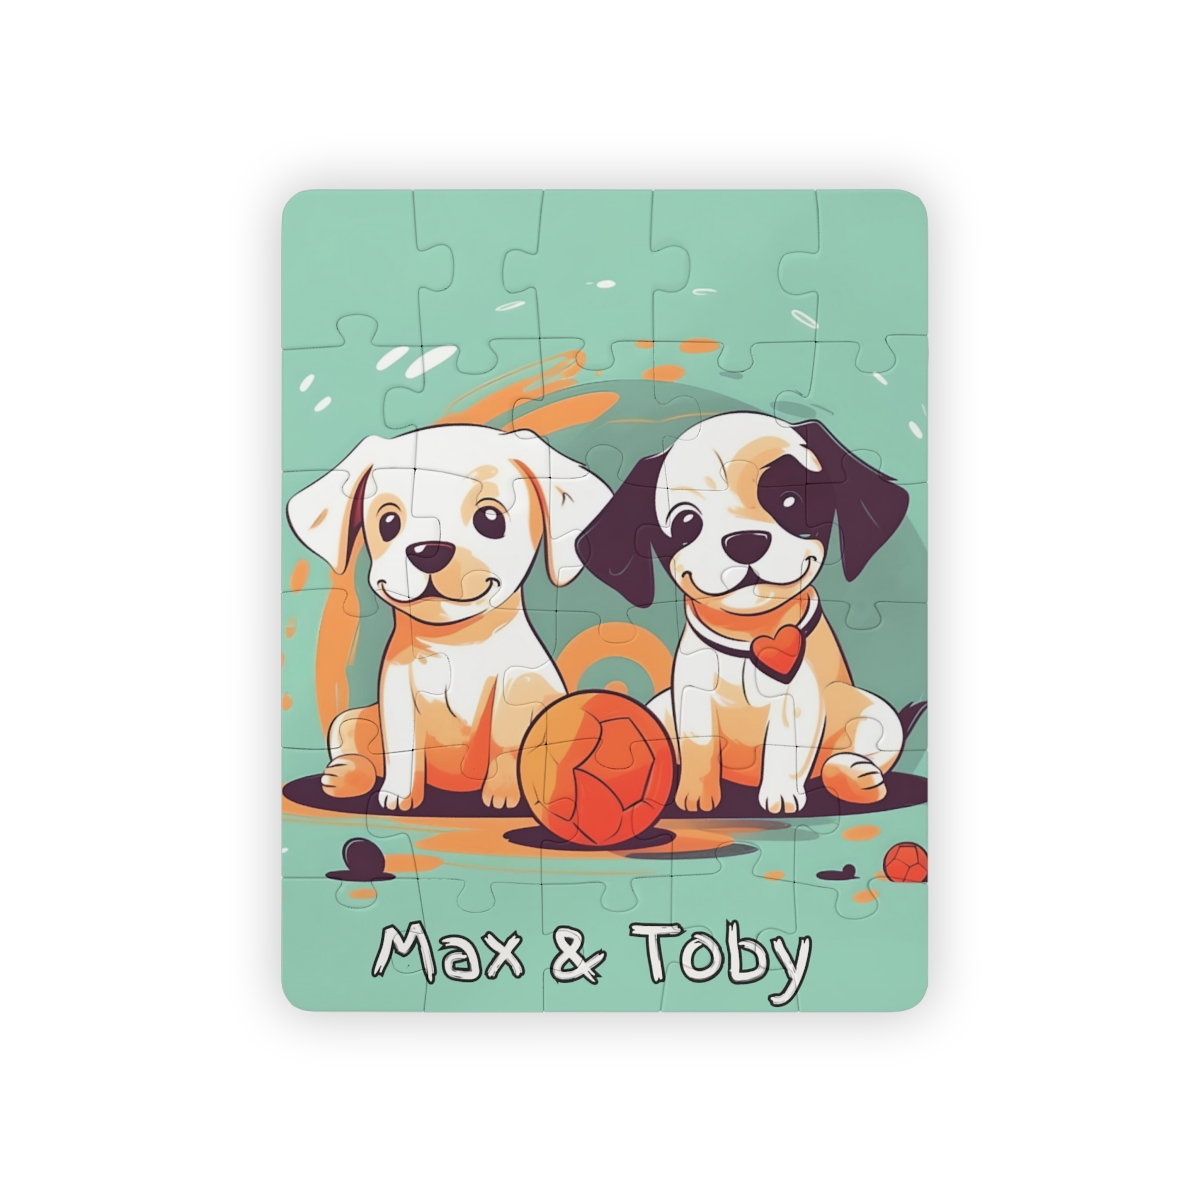 Max & Toby Kids' Puzzle product thumbnail image